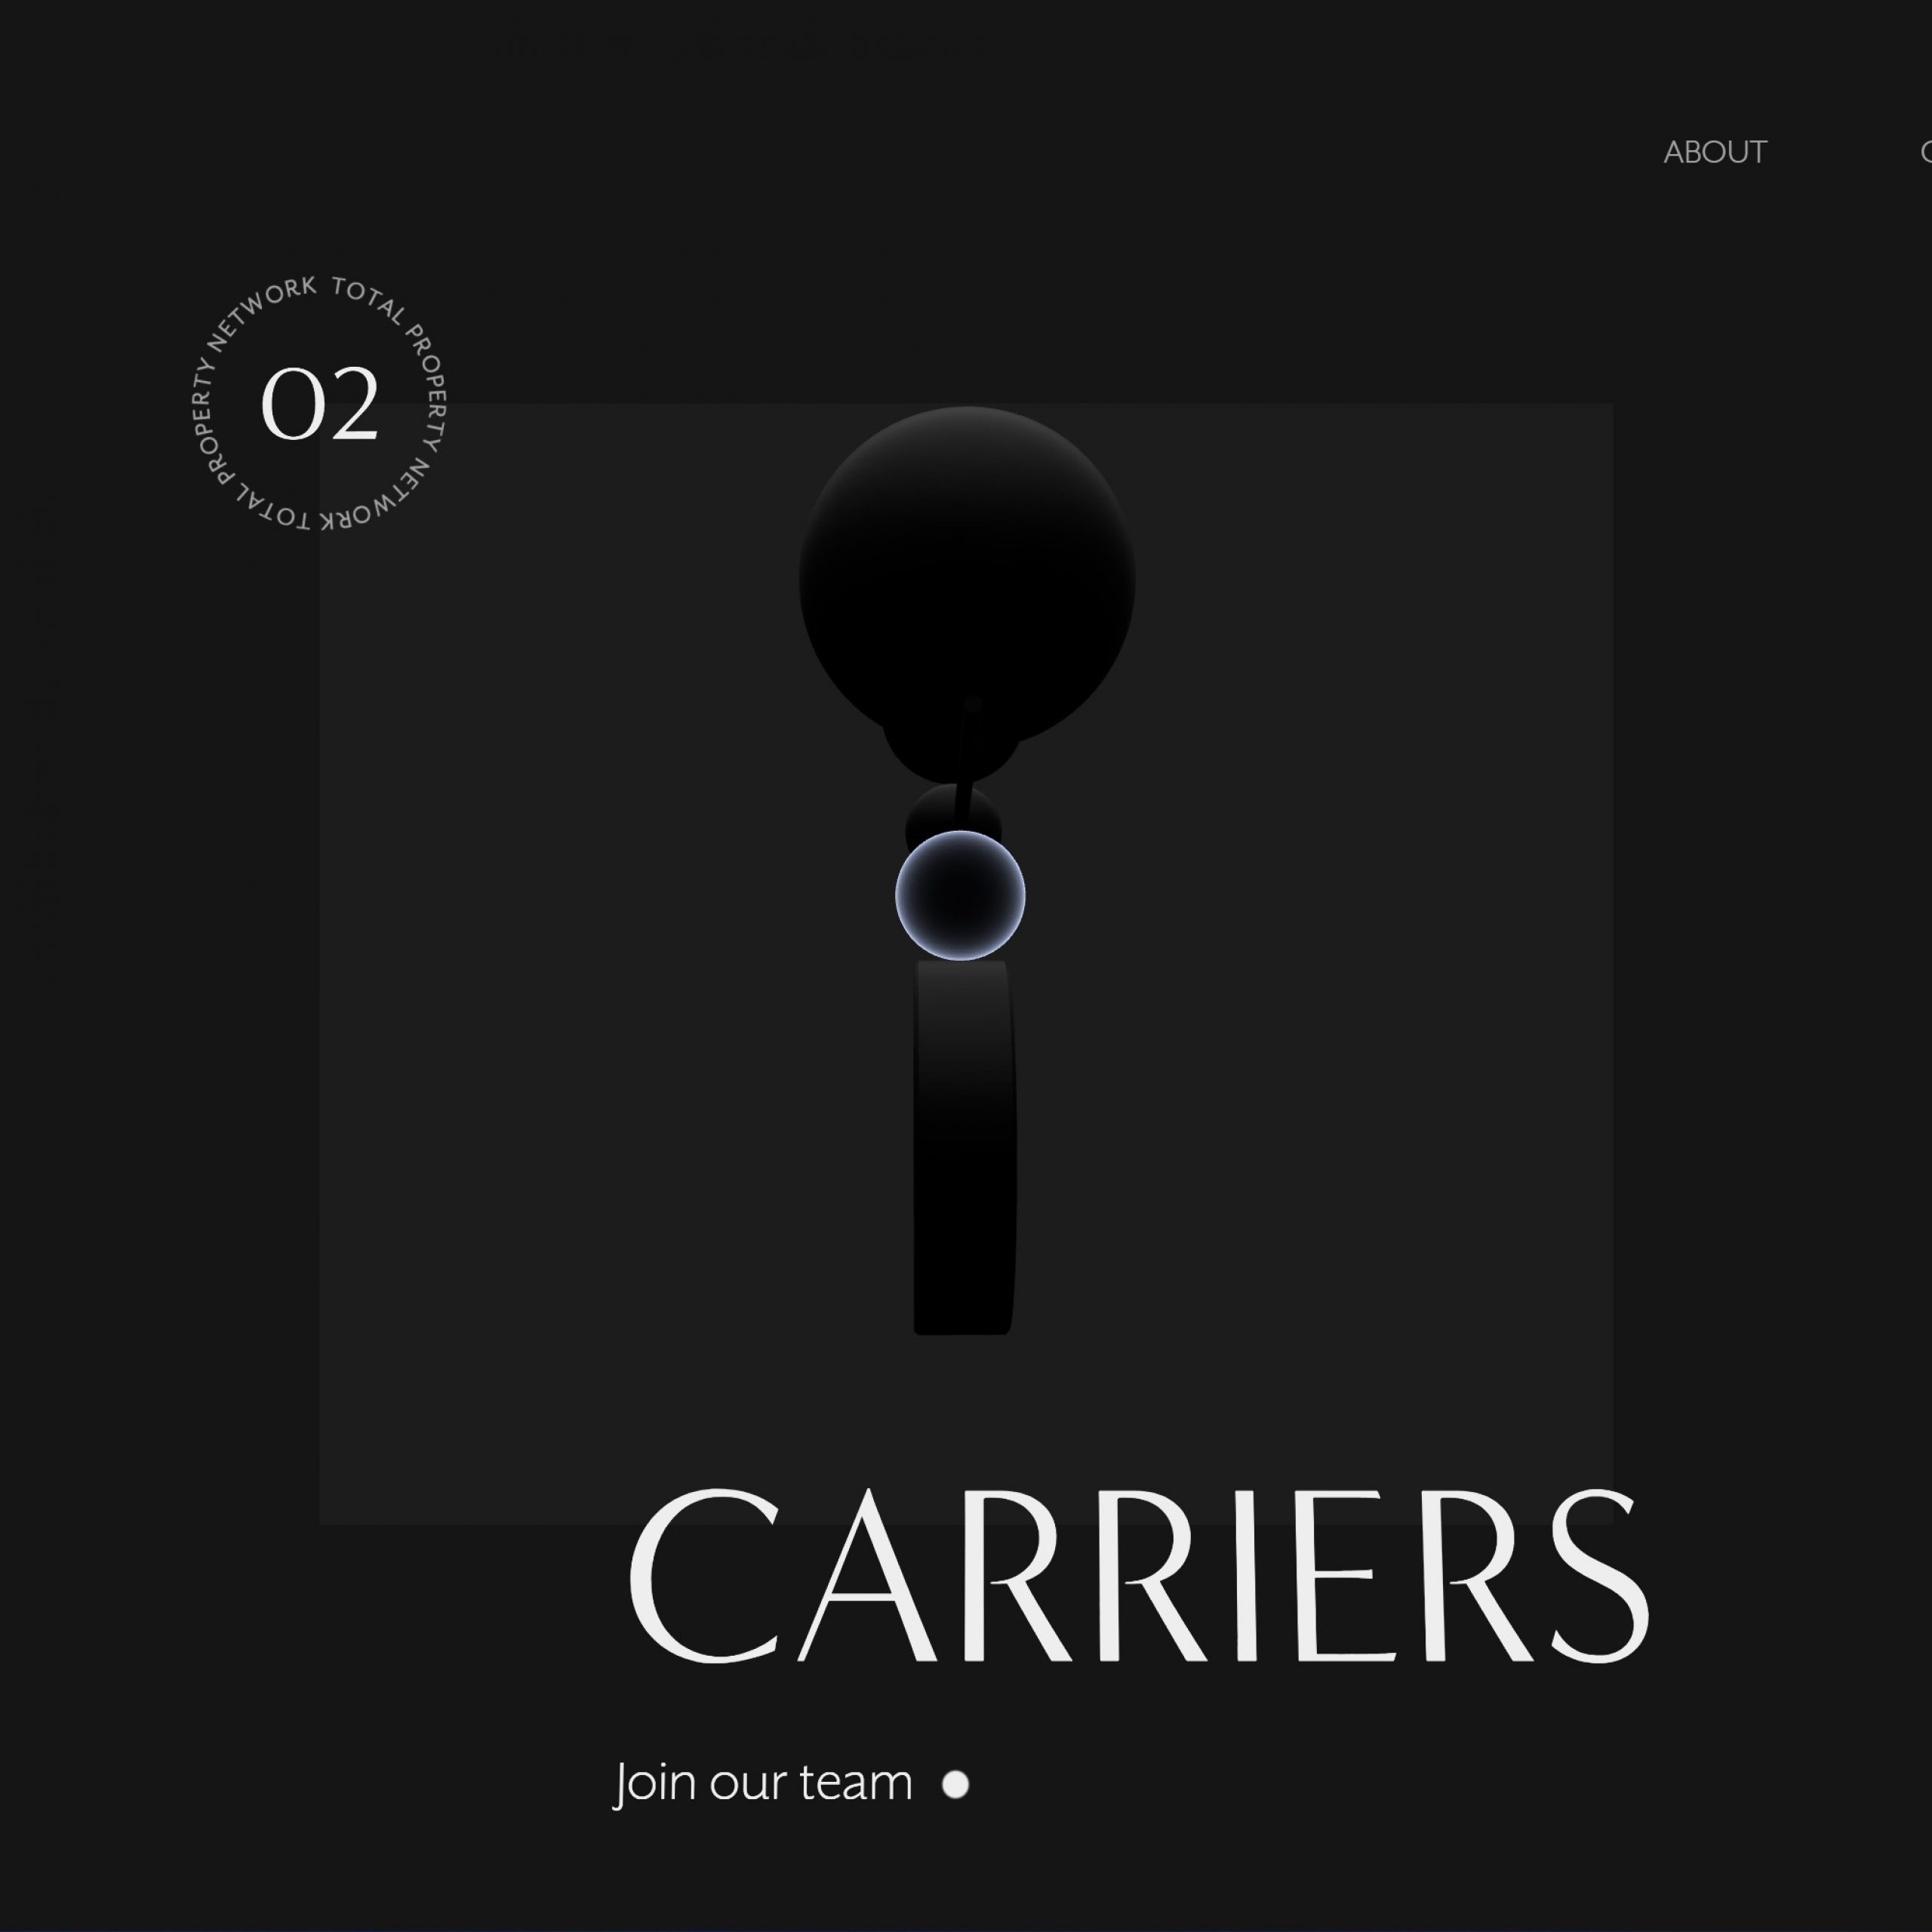 12 awesome dark-themed websites collection for your inspiration pocket